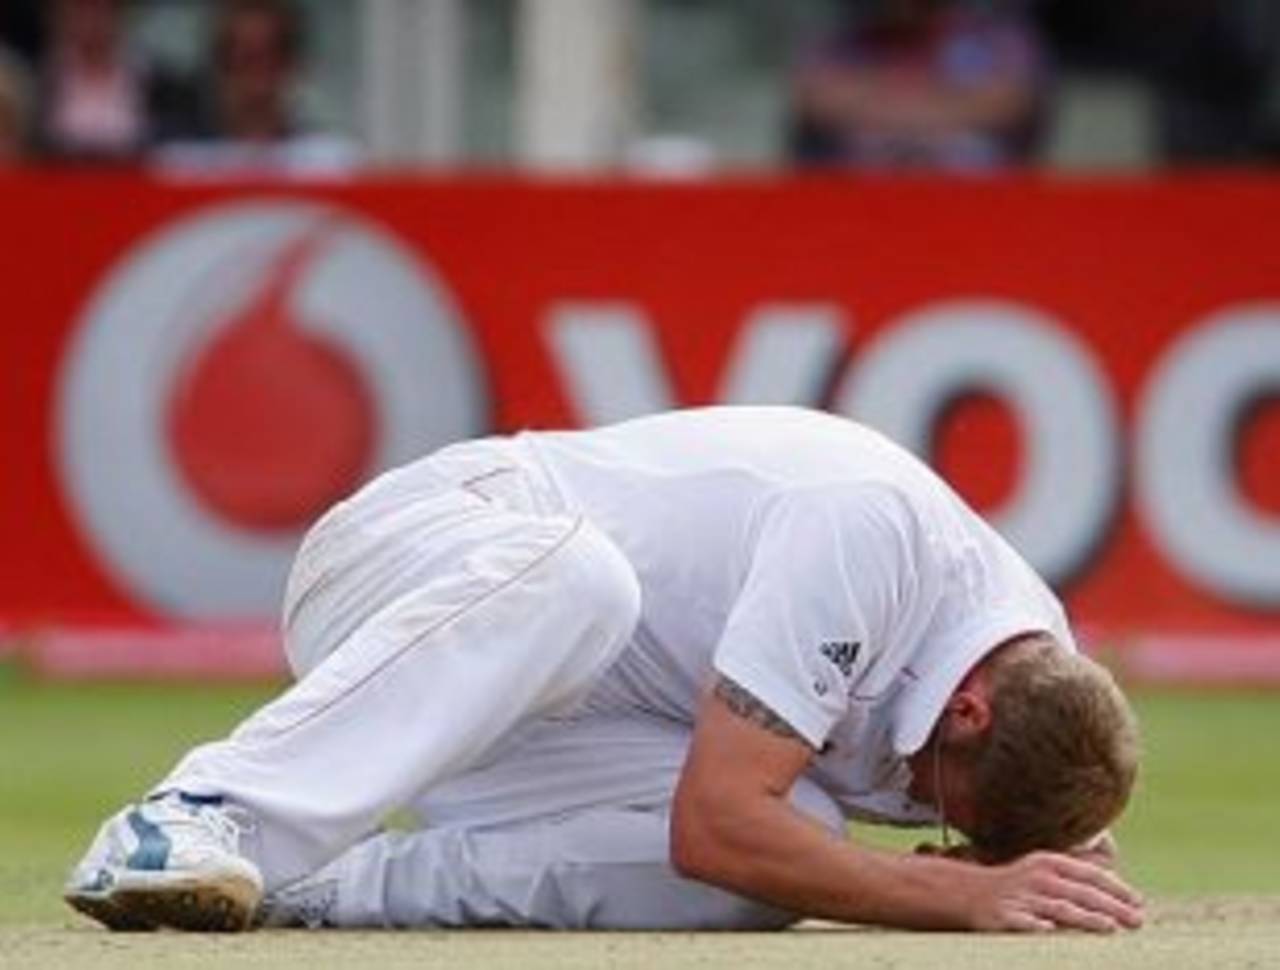 Andrew Flintoff took several moments longer to get up after falling down during his delivery stride&nbsp;&nbsp;&bull;&nbsp;&nbsp;Getty Images